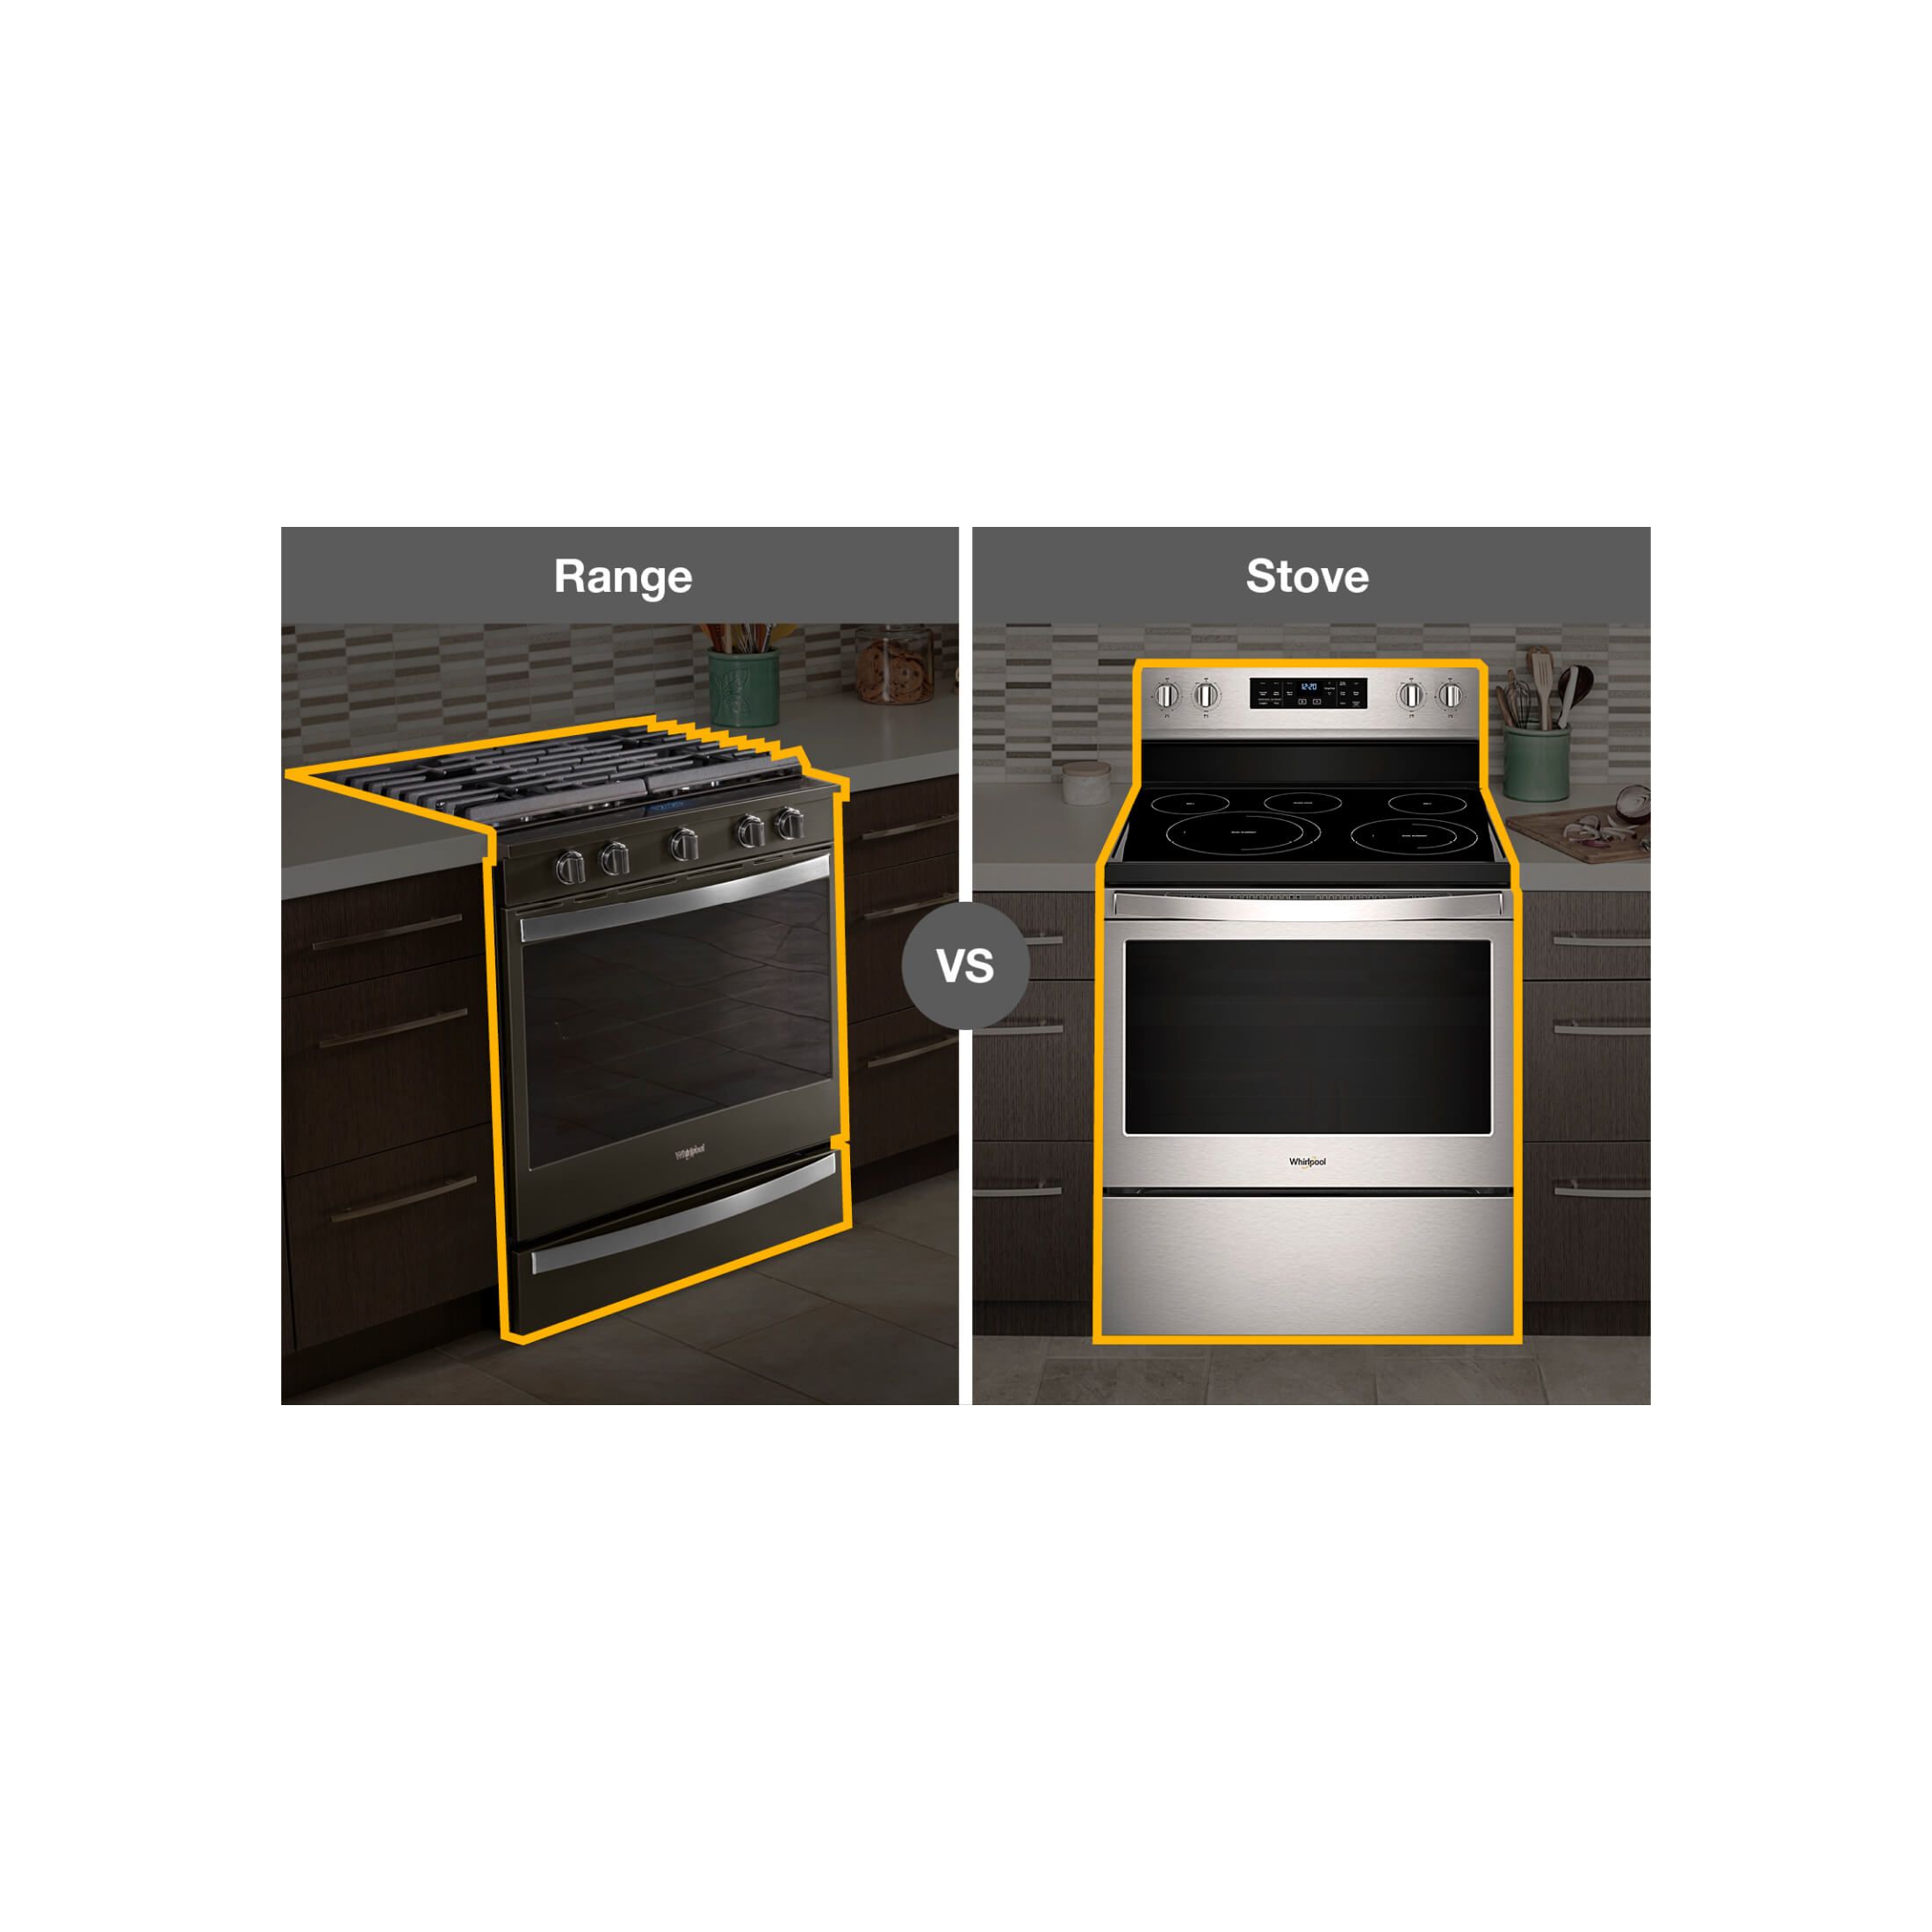 Which Is The Best Range Cooker For Your Kitchen?